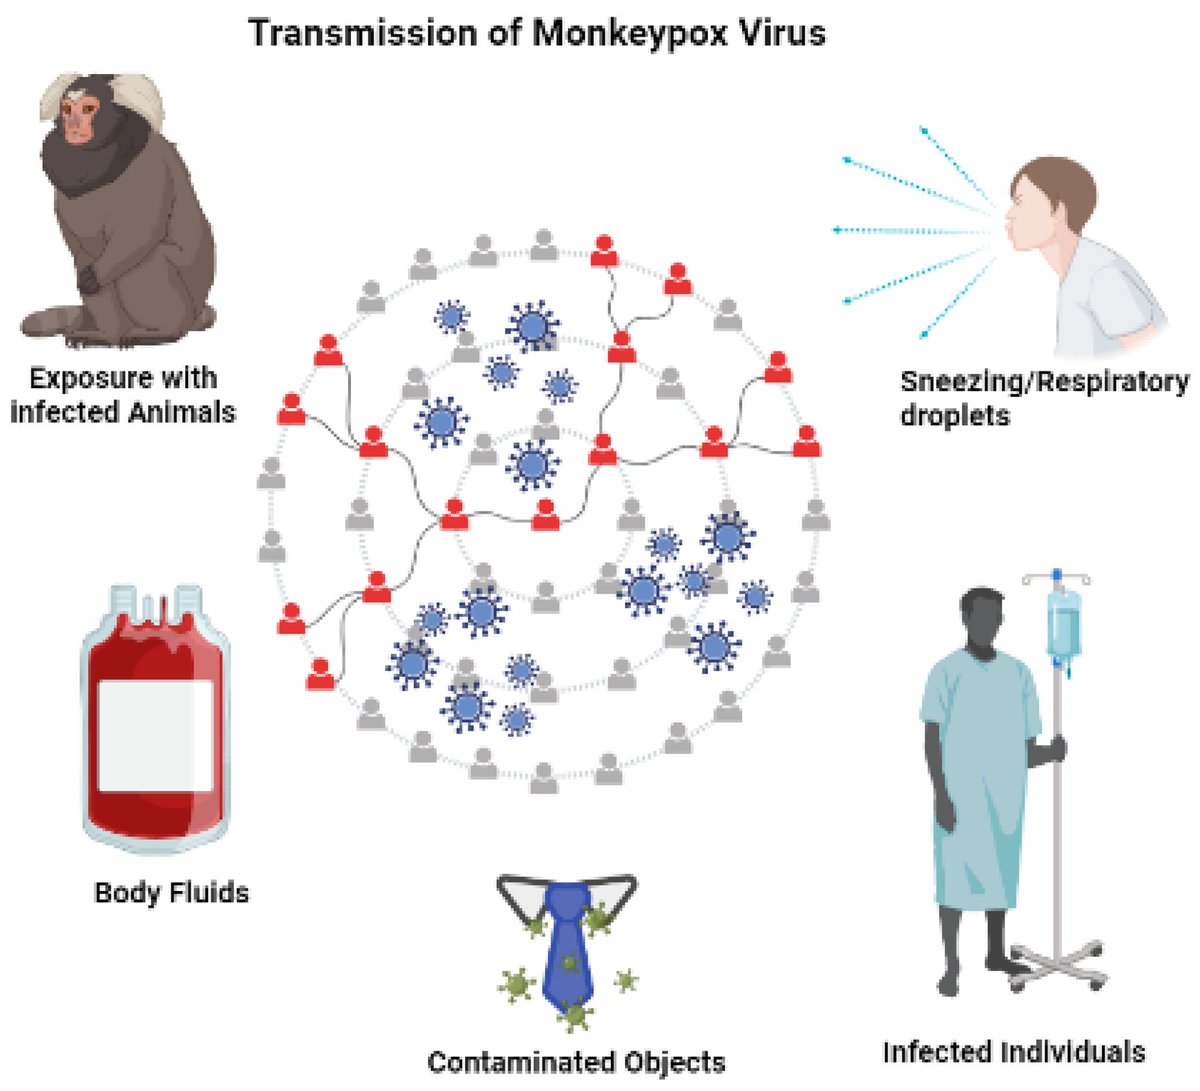 Monkeypox can be gotten by eating any animal that had been infected with the virus. Doctors warn that we should avoid eating dead animals and cover food properly so that infected rodents do not get in contact with. 
#PNPLZERvsMpox 
@whocmr
@MinsanteCMR
@CmrZoonoses  
@BloggersCM